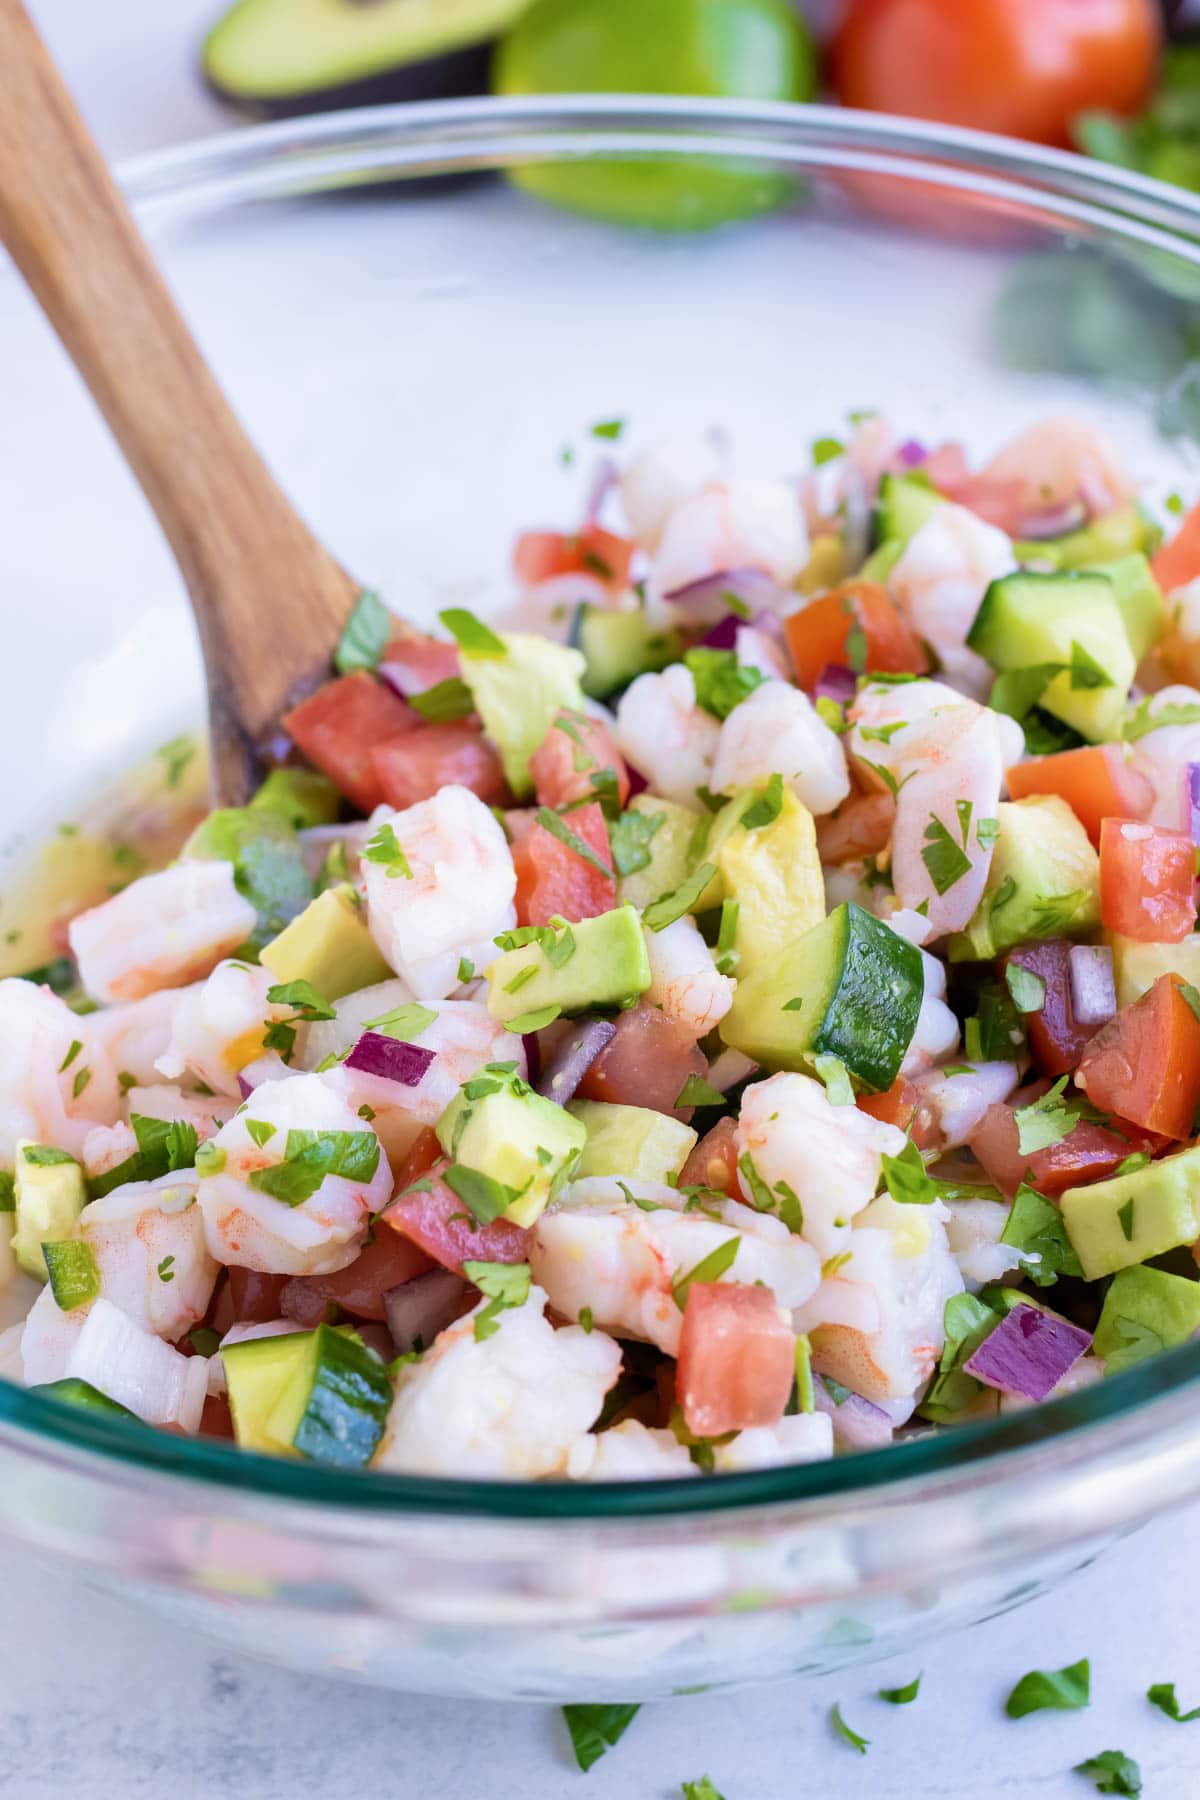 Shrimp ceviche is mixed thoroughly in a large glass bowl before being served.